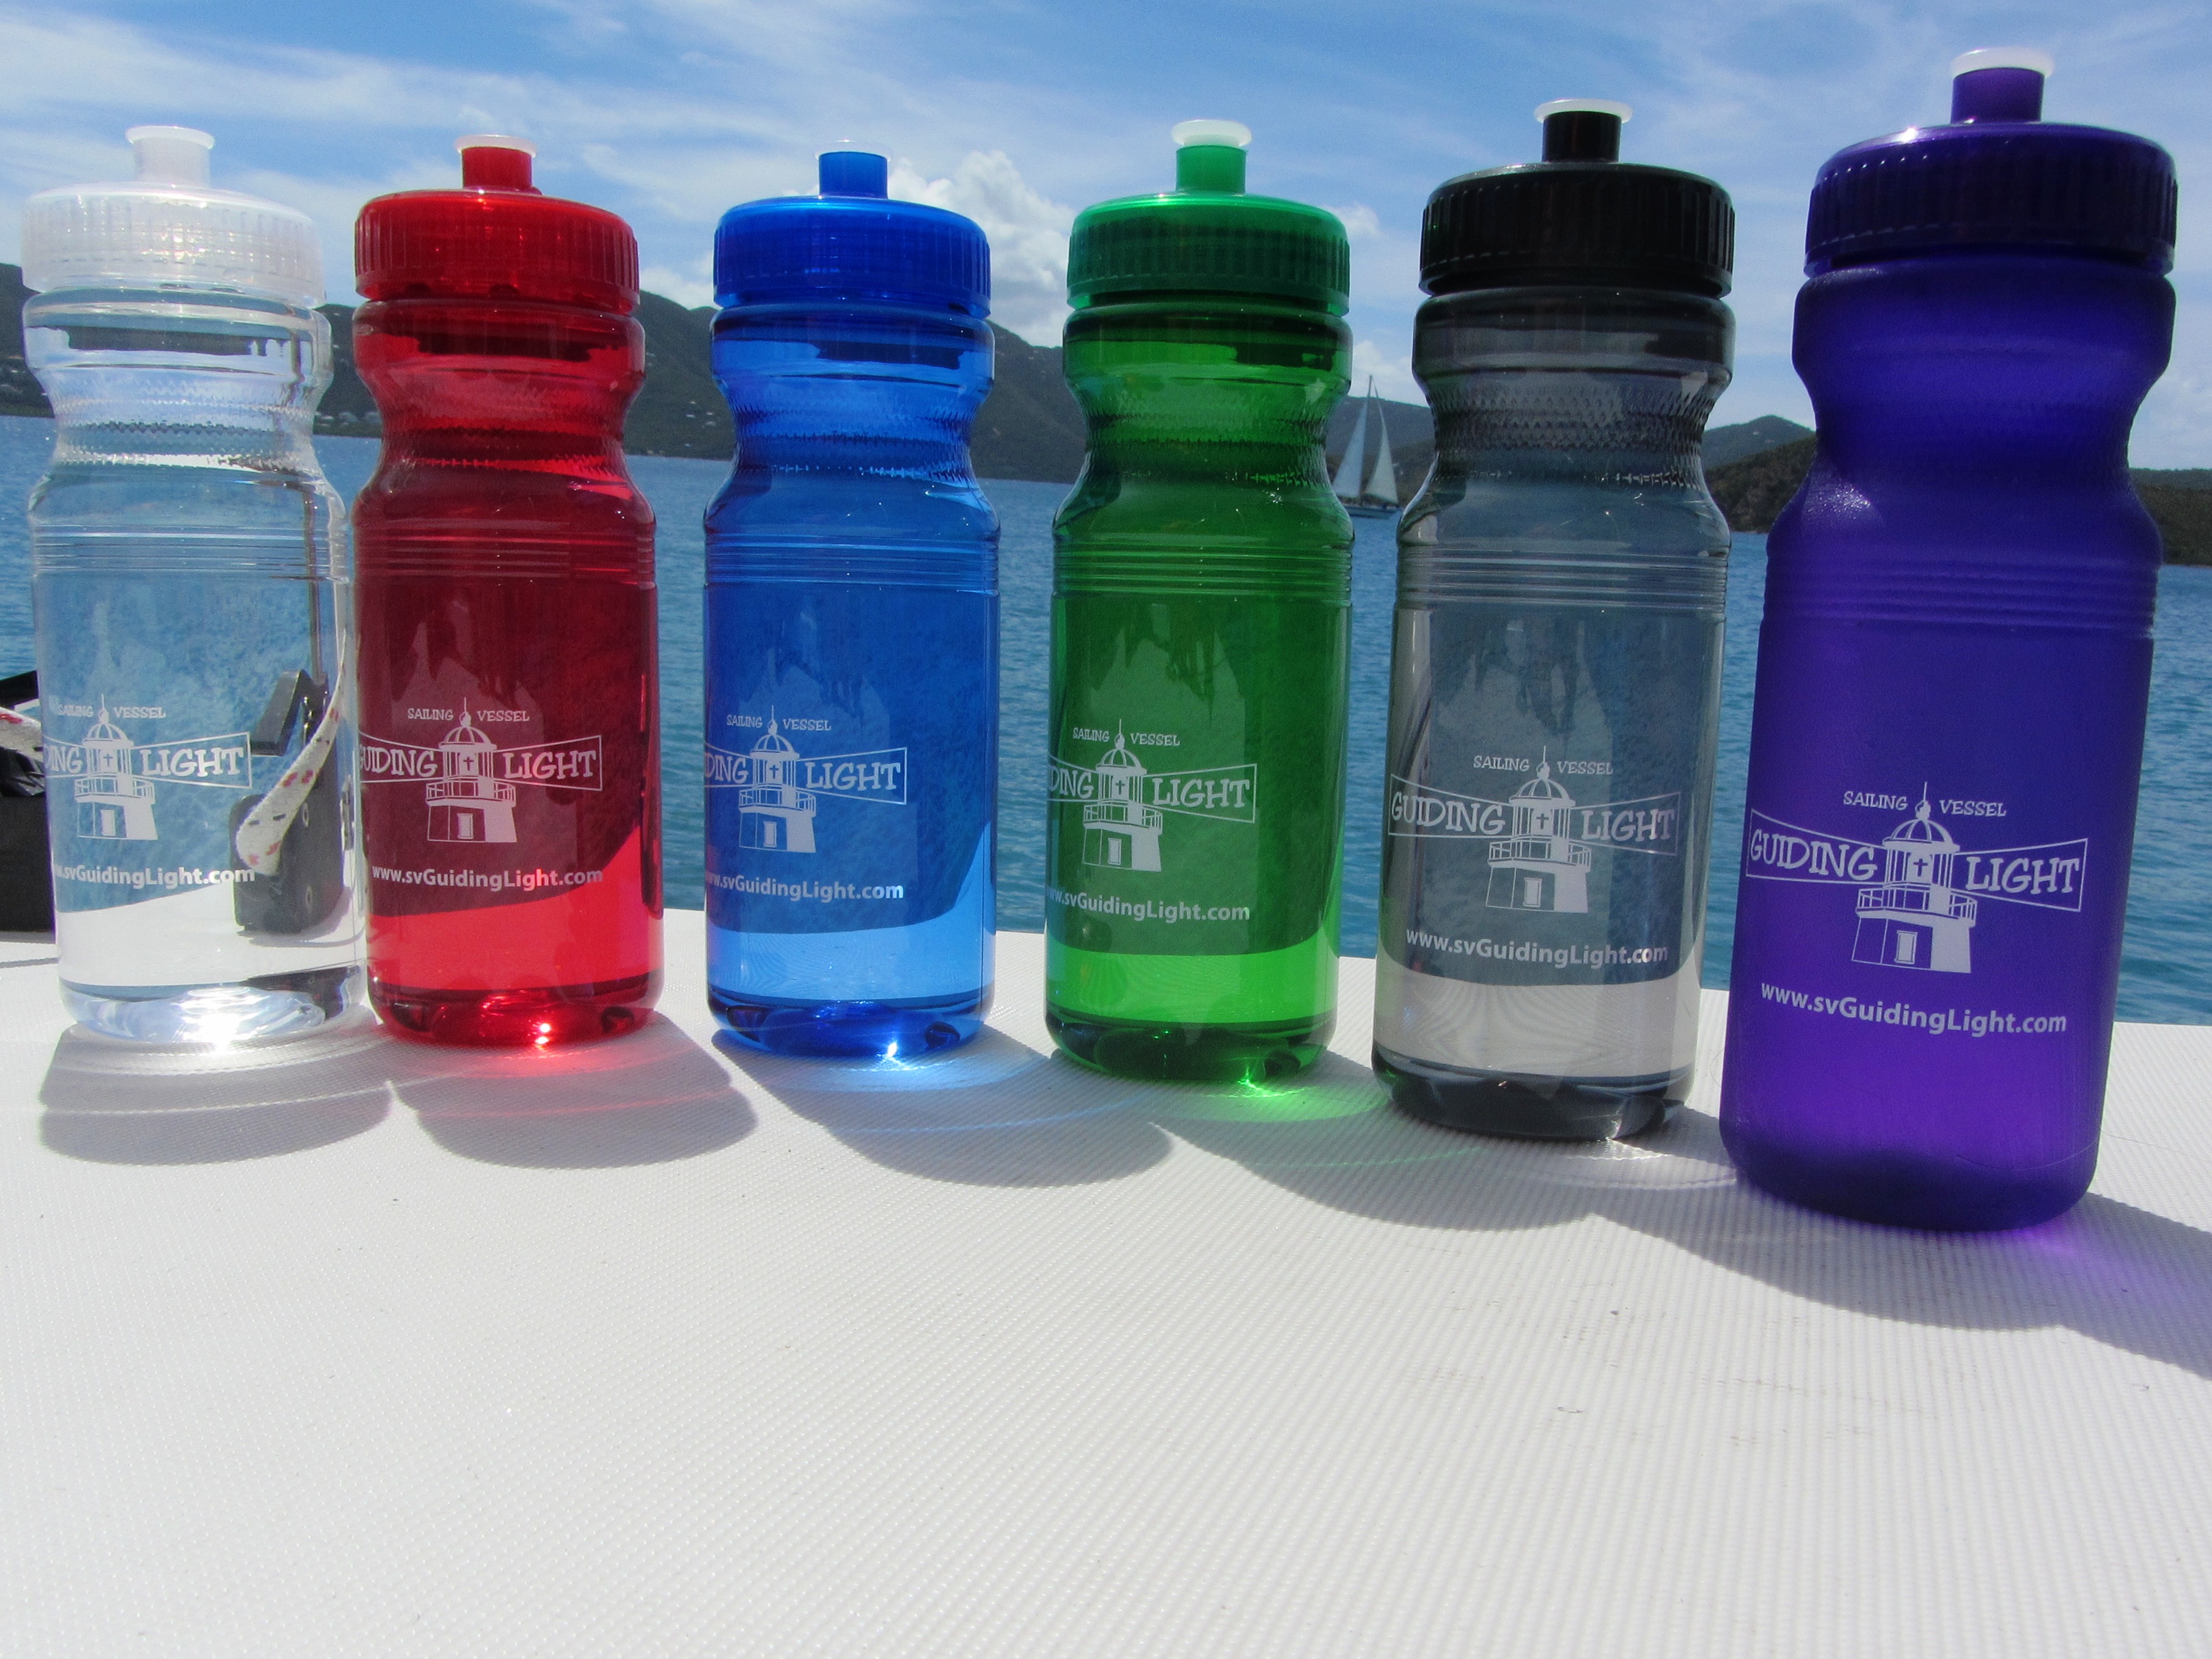 New water bottles on the Guiding Light